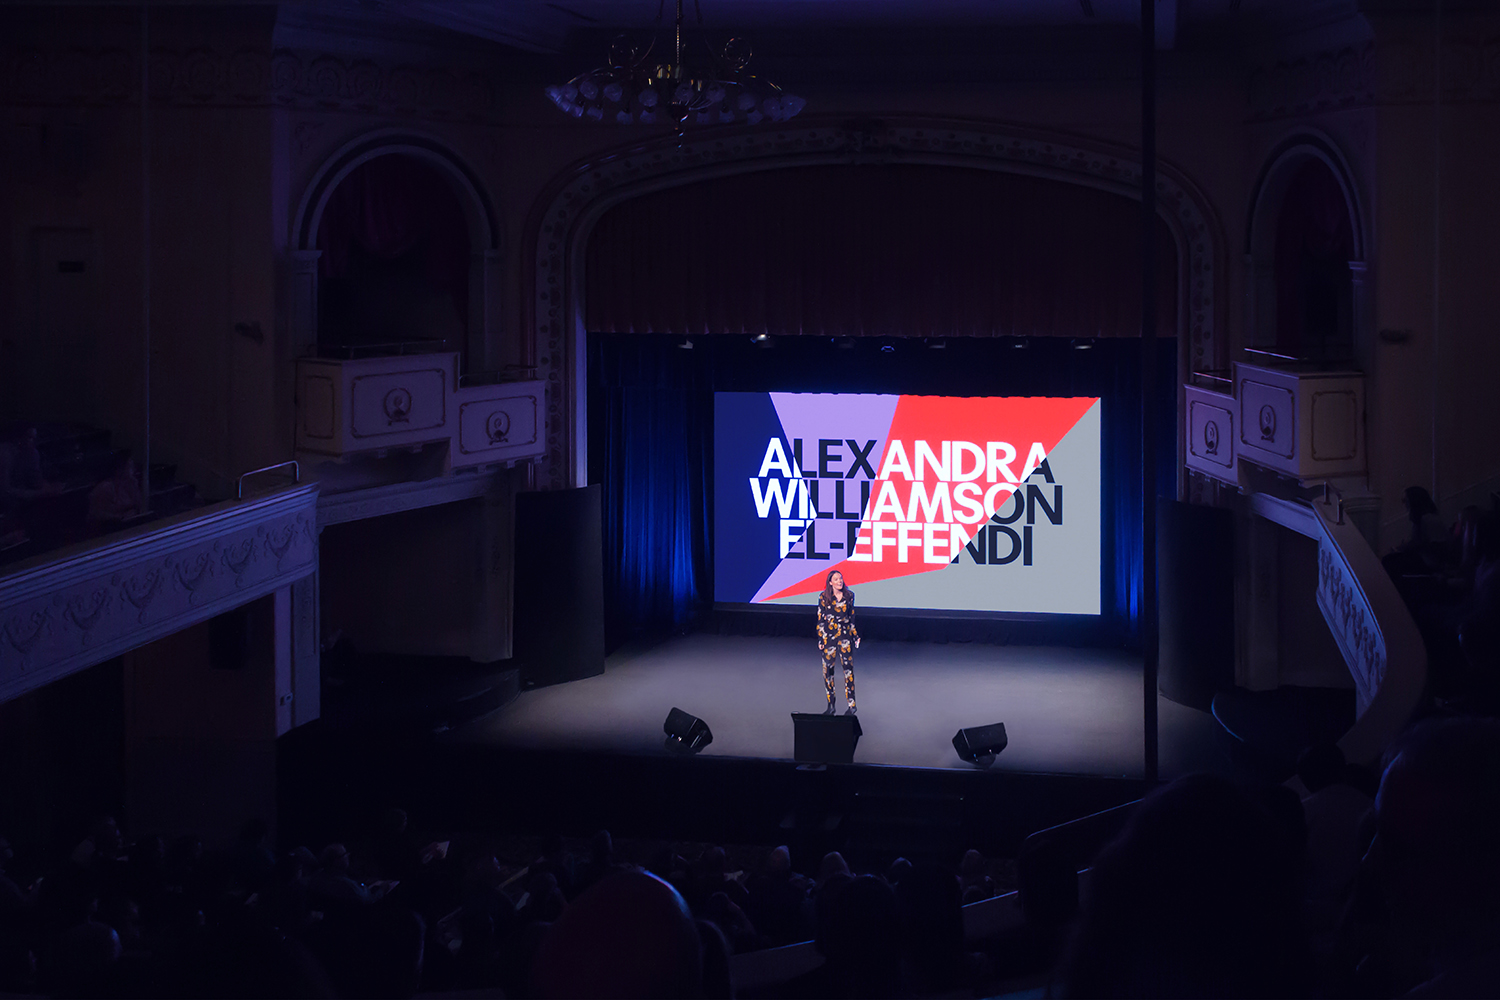 Graphic identity and motion graphics by Collins for PopTech Conference